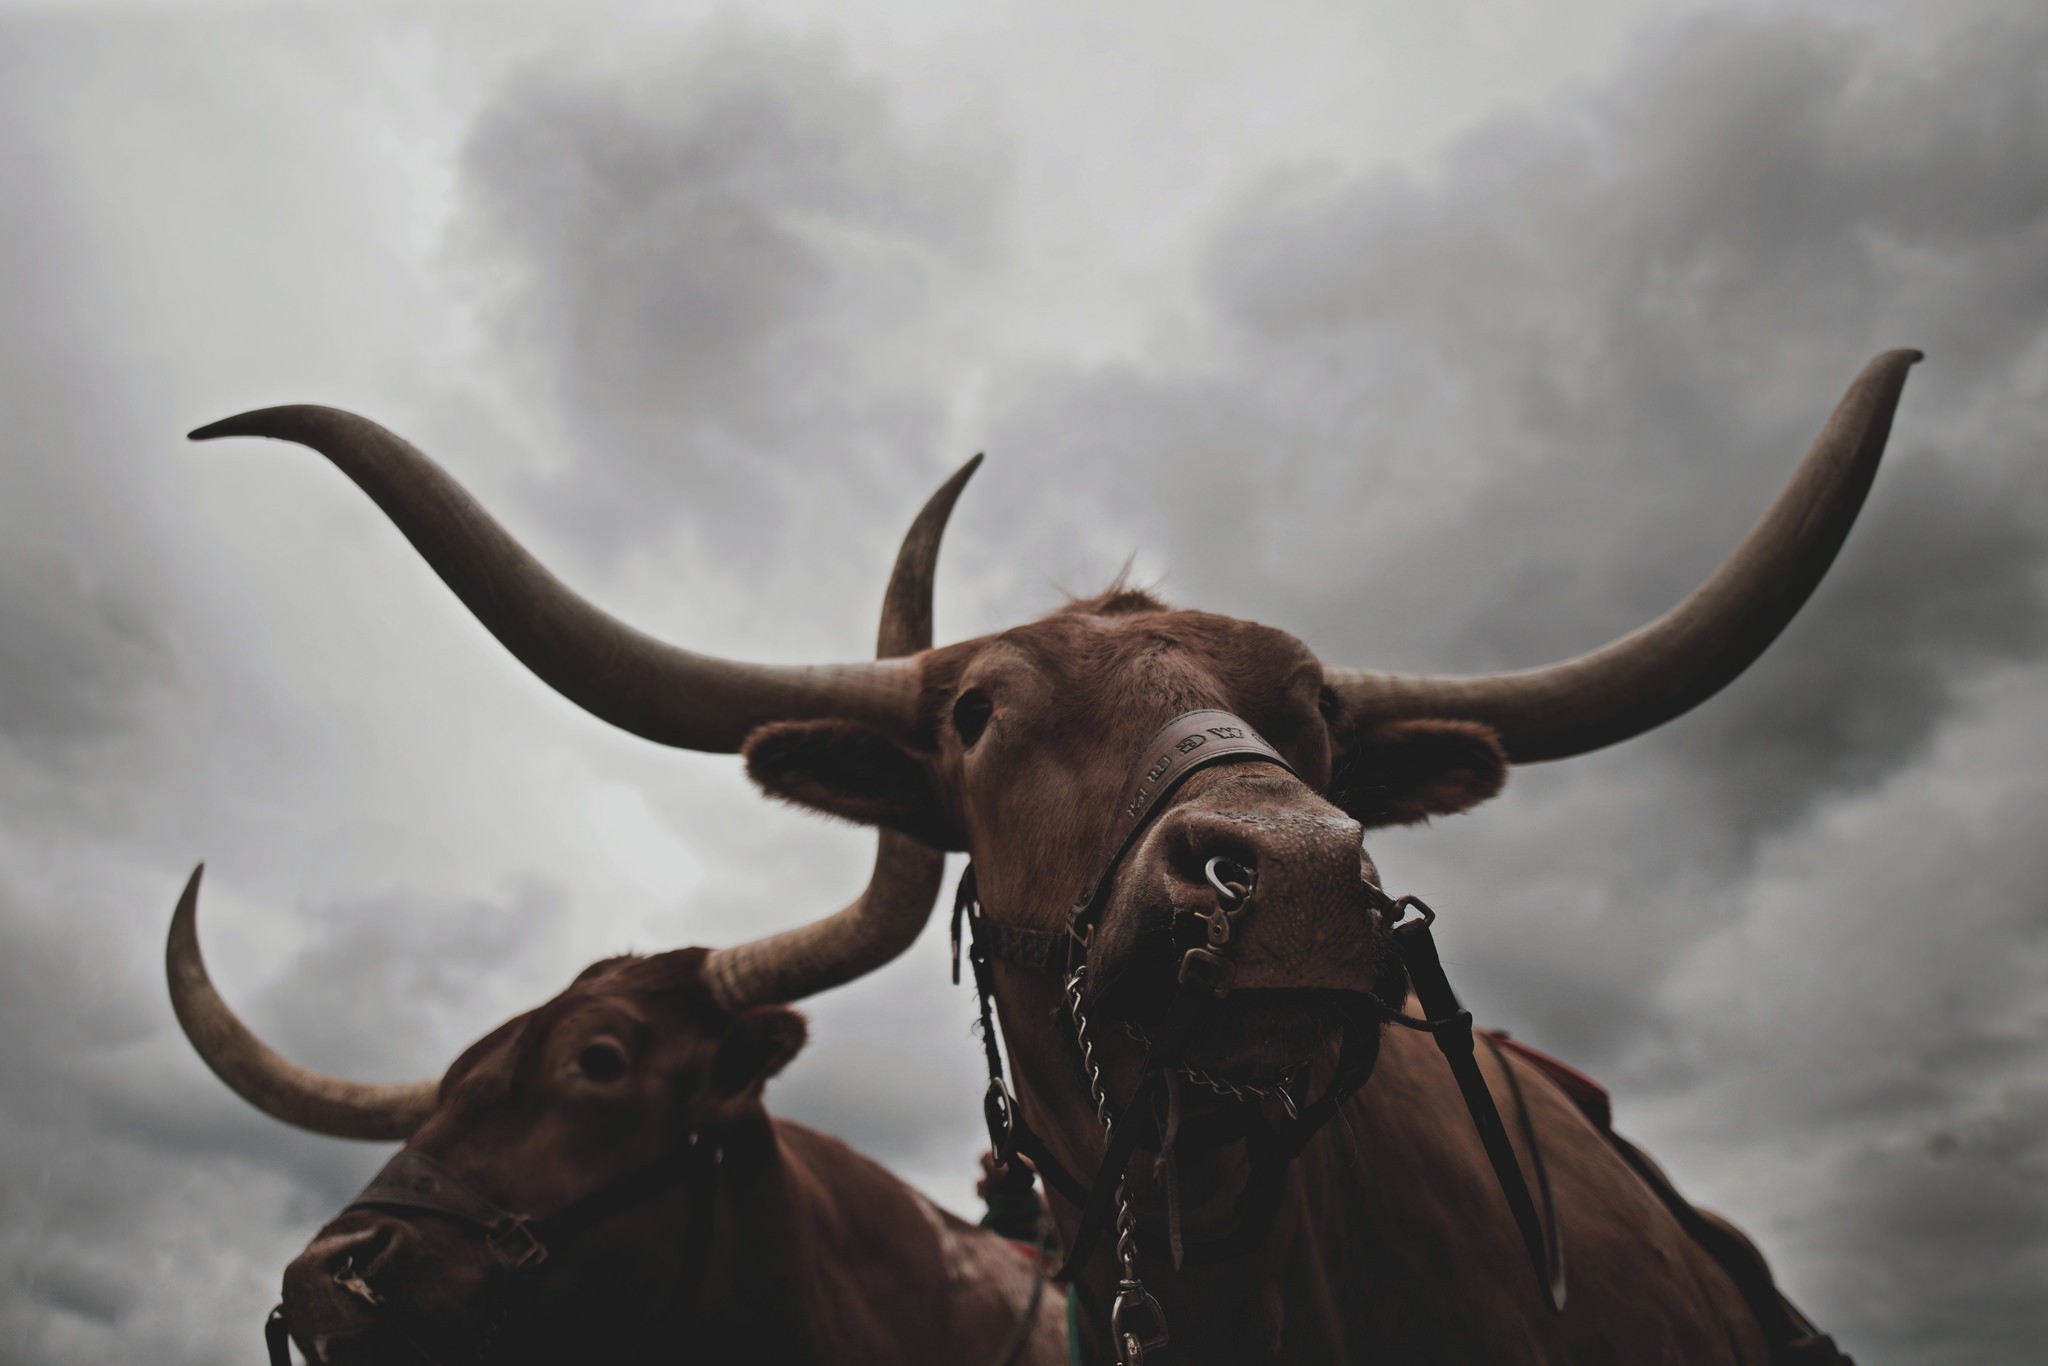 angry looking away photography nature bull animals clouds storm horns chains Wallpaper